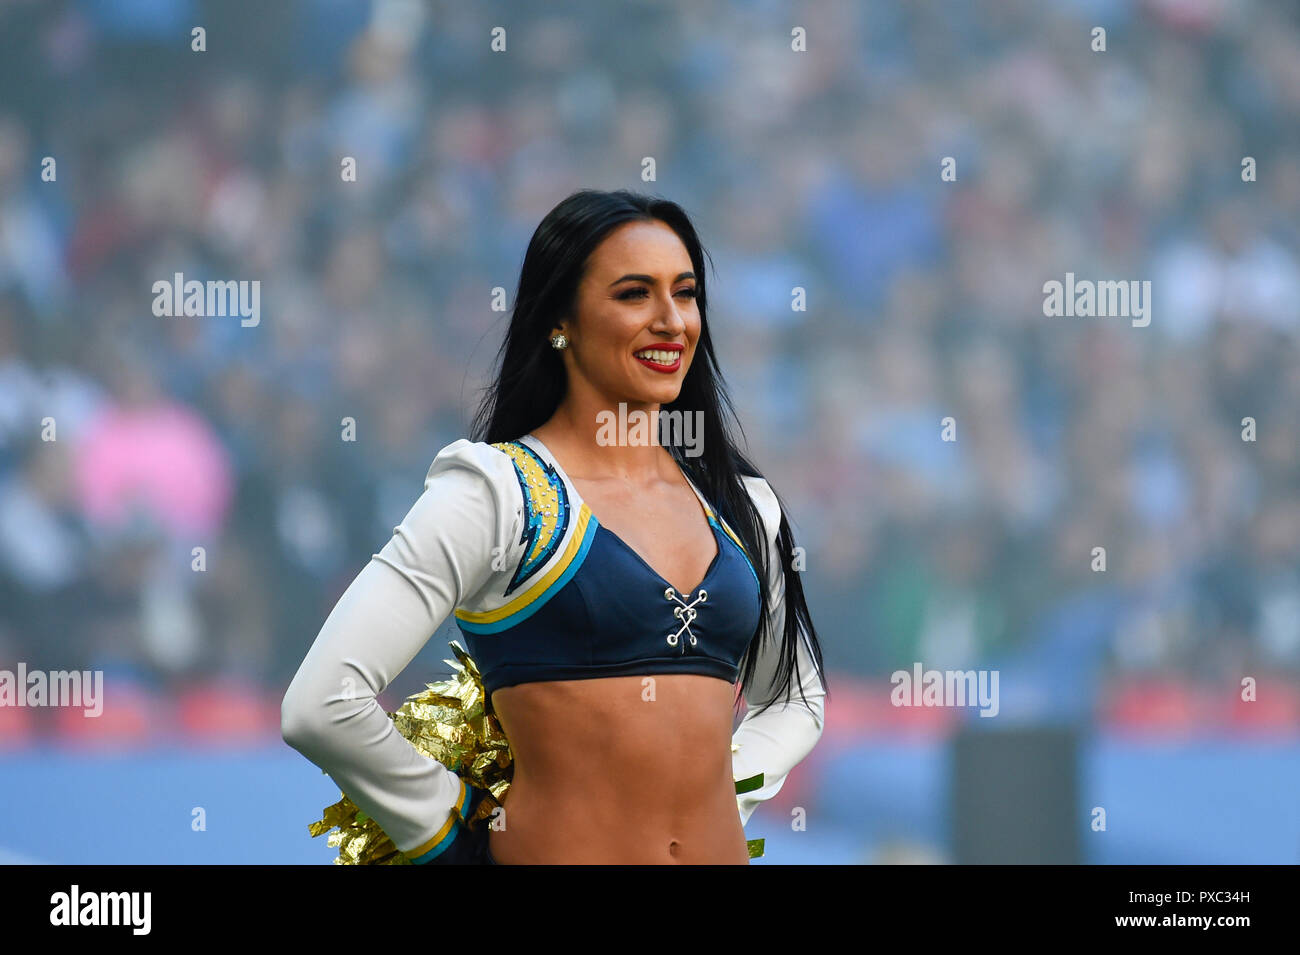 London, UK.  21 October 2018. Chargers cheerleaders at the Tennessee Titans at Los Angeles Chargers NFL game at Wembley Stadium, the second of the NFL London 2018 games.  Credit: Stephen Chung / Alamy Live News Stock Photo